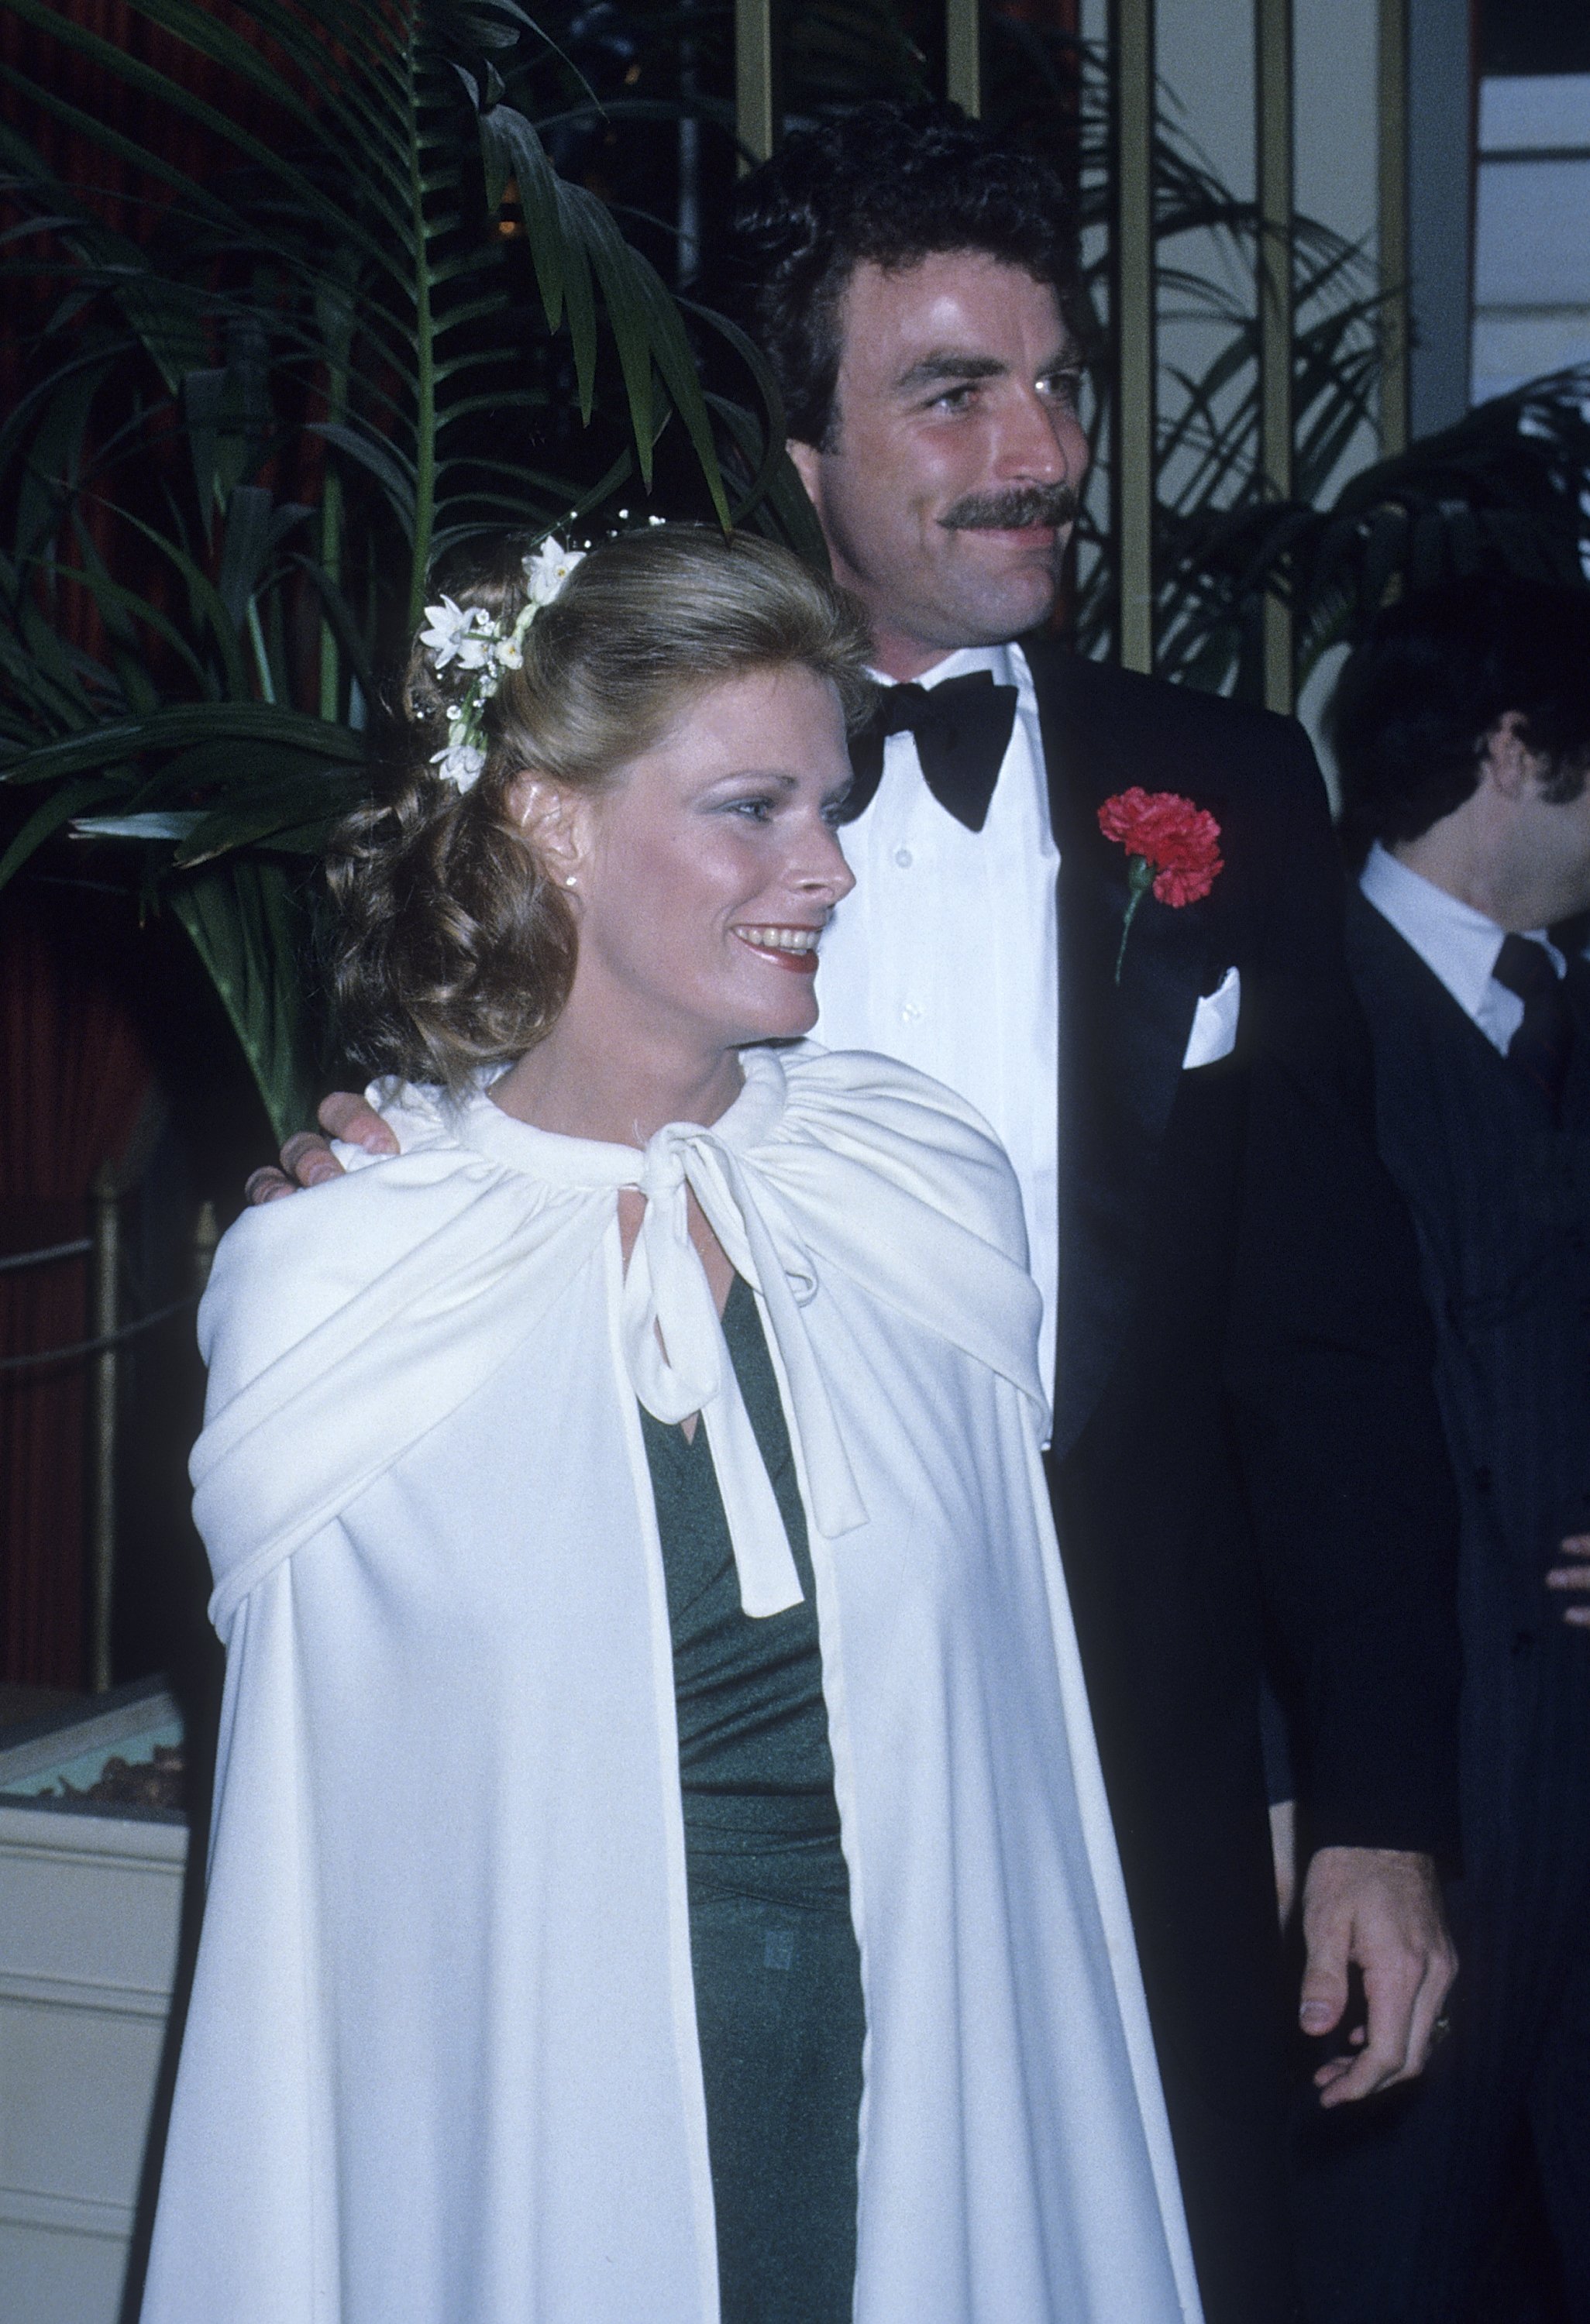 Actor Tom Selleck and wife Jacqueline Ray attend the 35th Annual Golden Globe Awards on January 28, 1978 at the Beverly Hilton Hotel in Beverly Hills, California. | Source: Getty Images